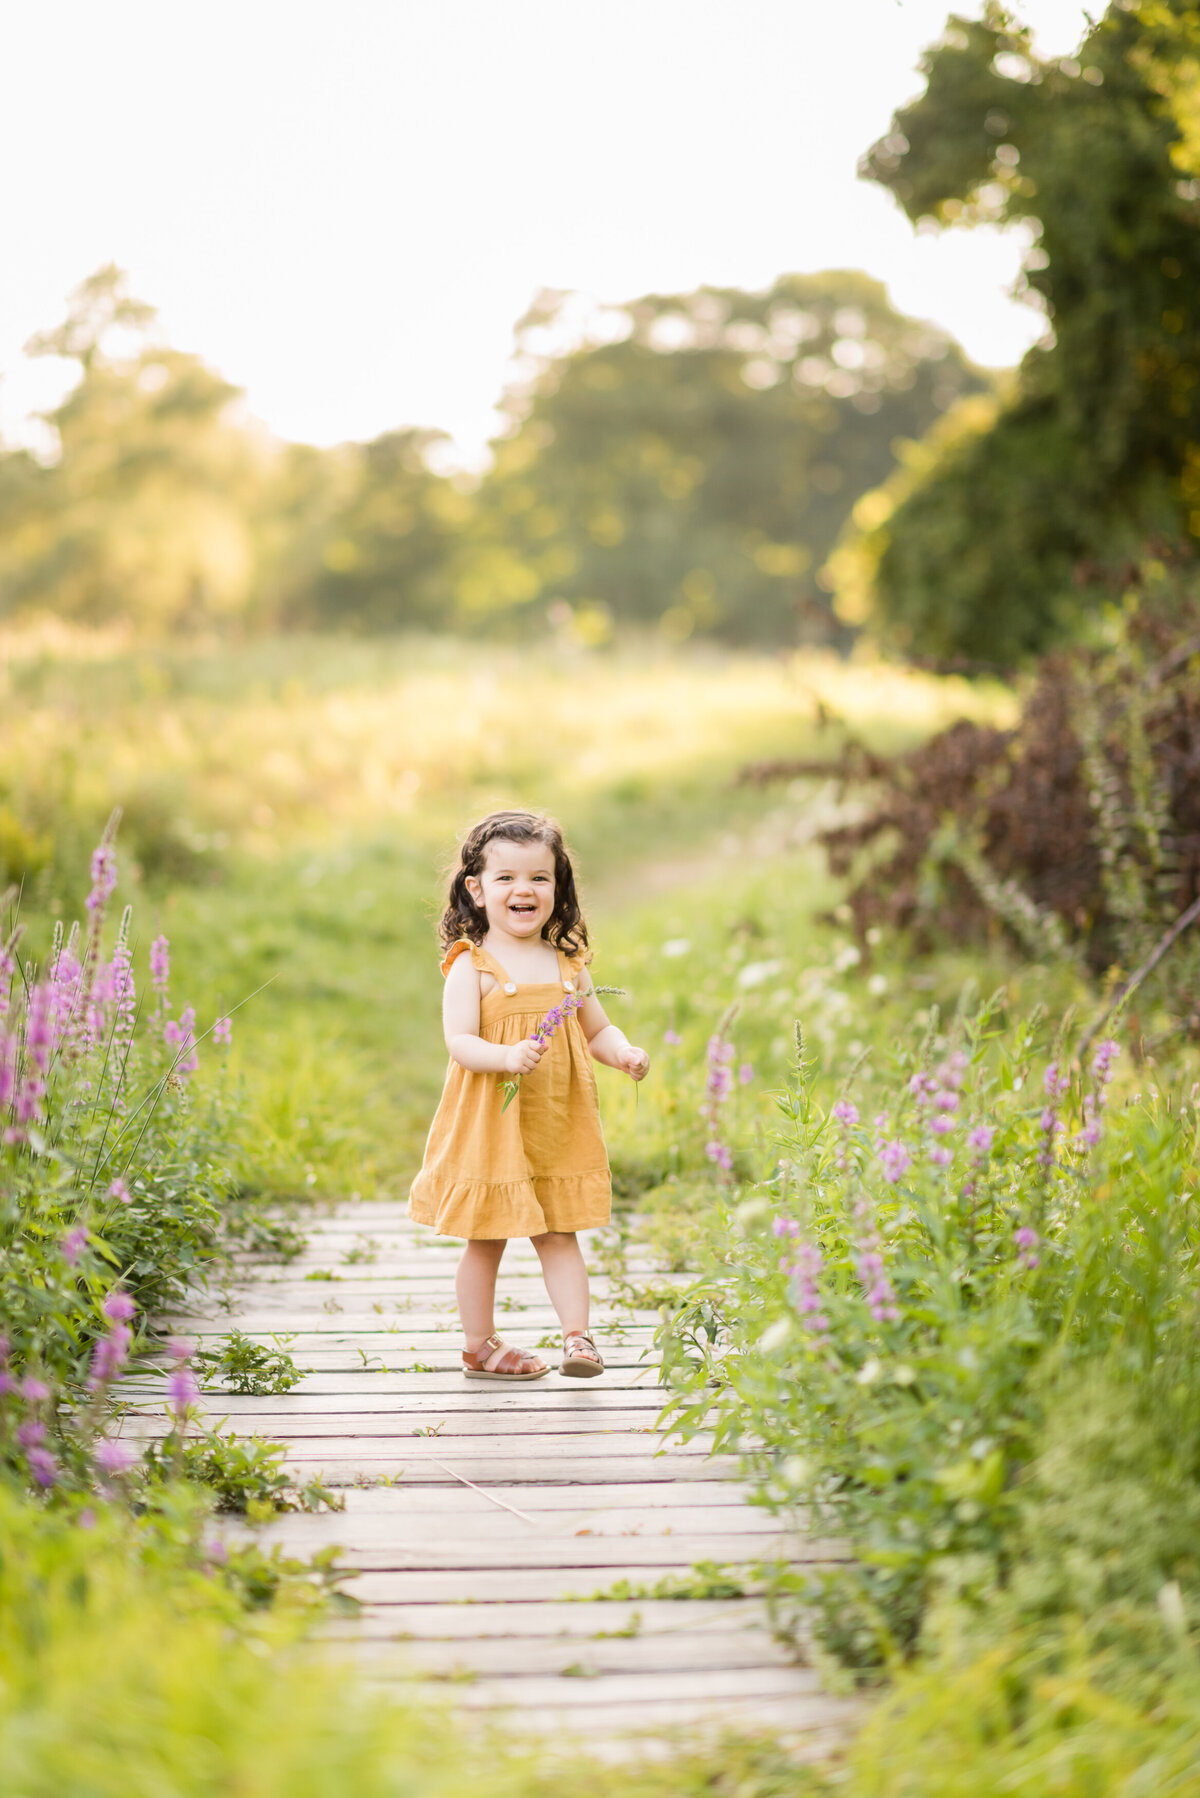 Boston-family-photographer-bella-wang-photography-Lifestyle-session-outdoor-wildflower-15